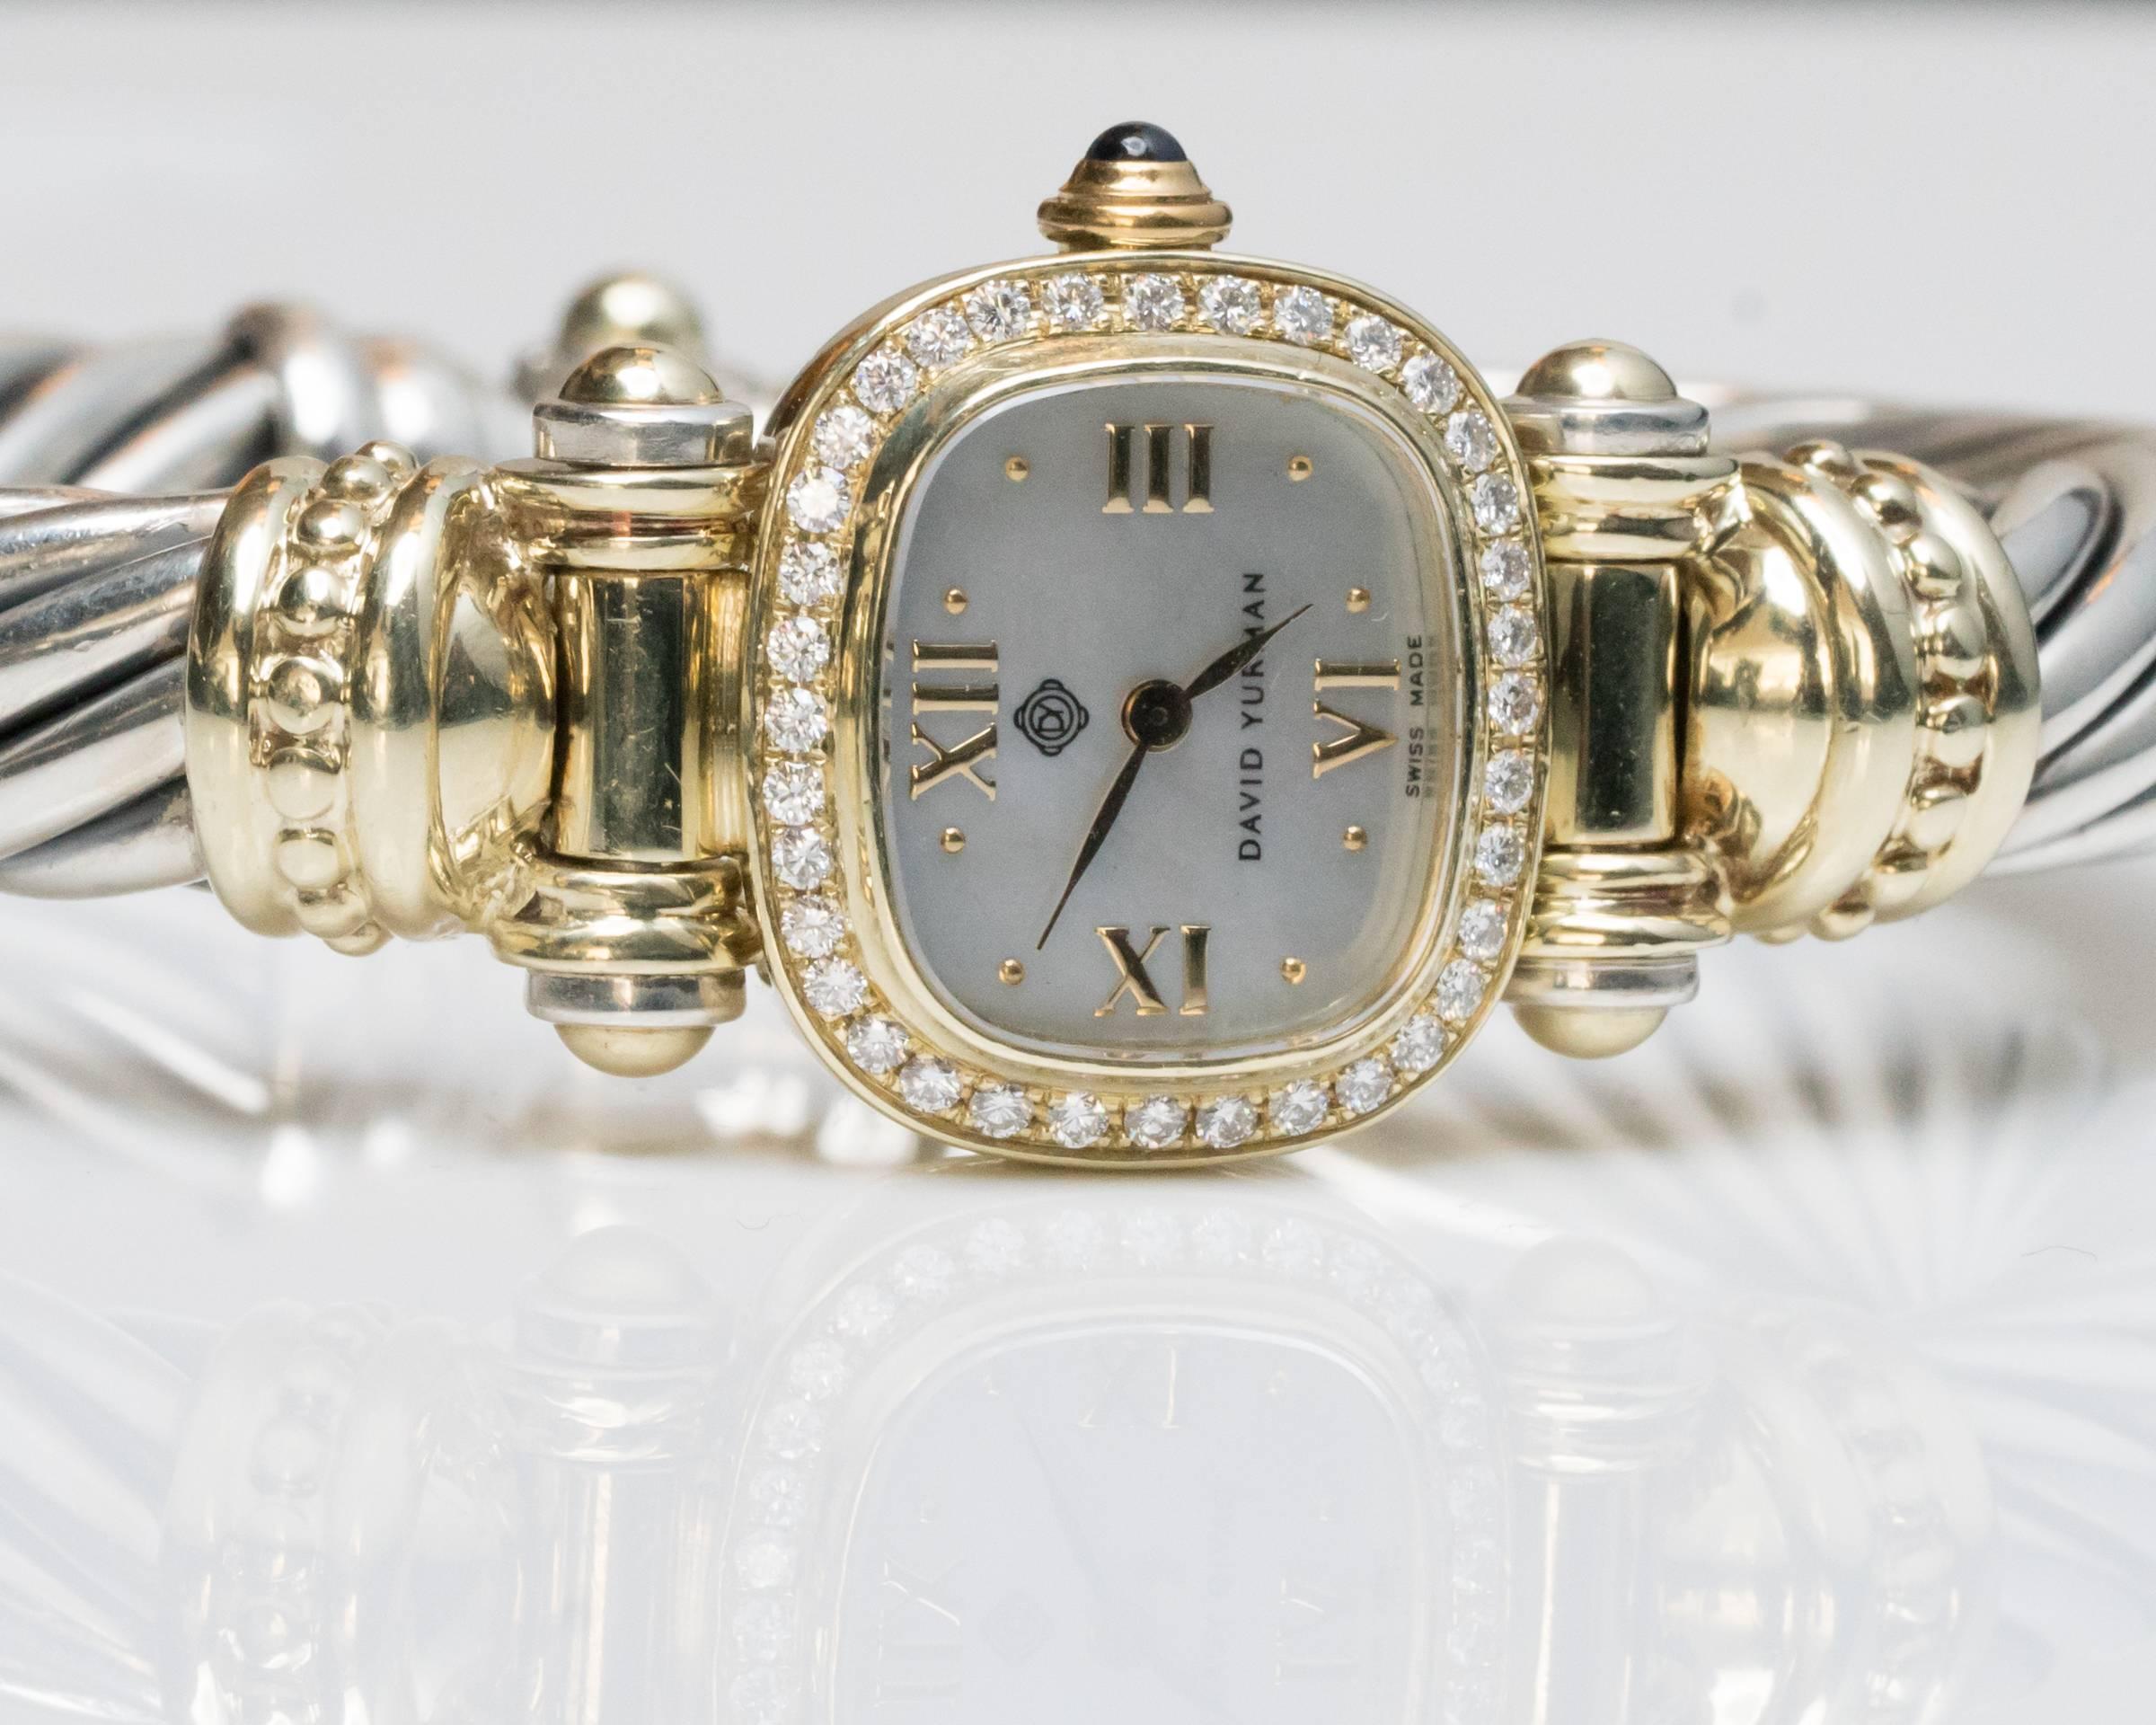 Classic David Yurman cable Bangle Watch with factory diamond bezel and sapphire cabochon crown. The dial is a rare Tahitian Mother-of-Pearl with gold hour markers. Measures 24mm wide with crown. Bangle bracelet is a medium size and will fit most